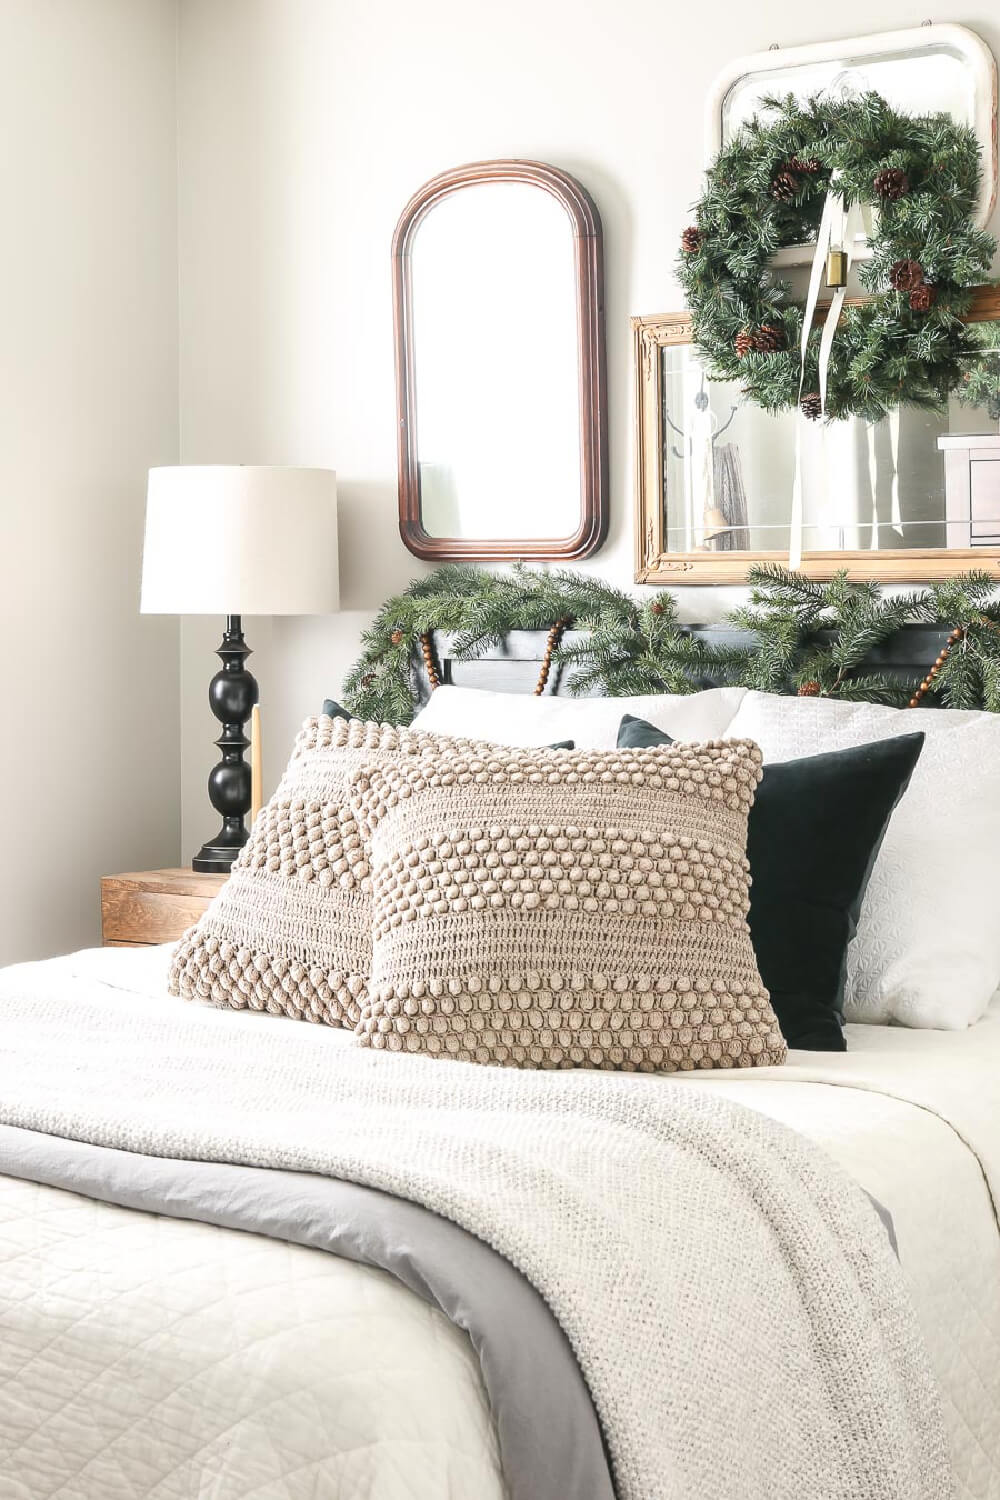 A guest bedroom decorated for the holiday season